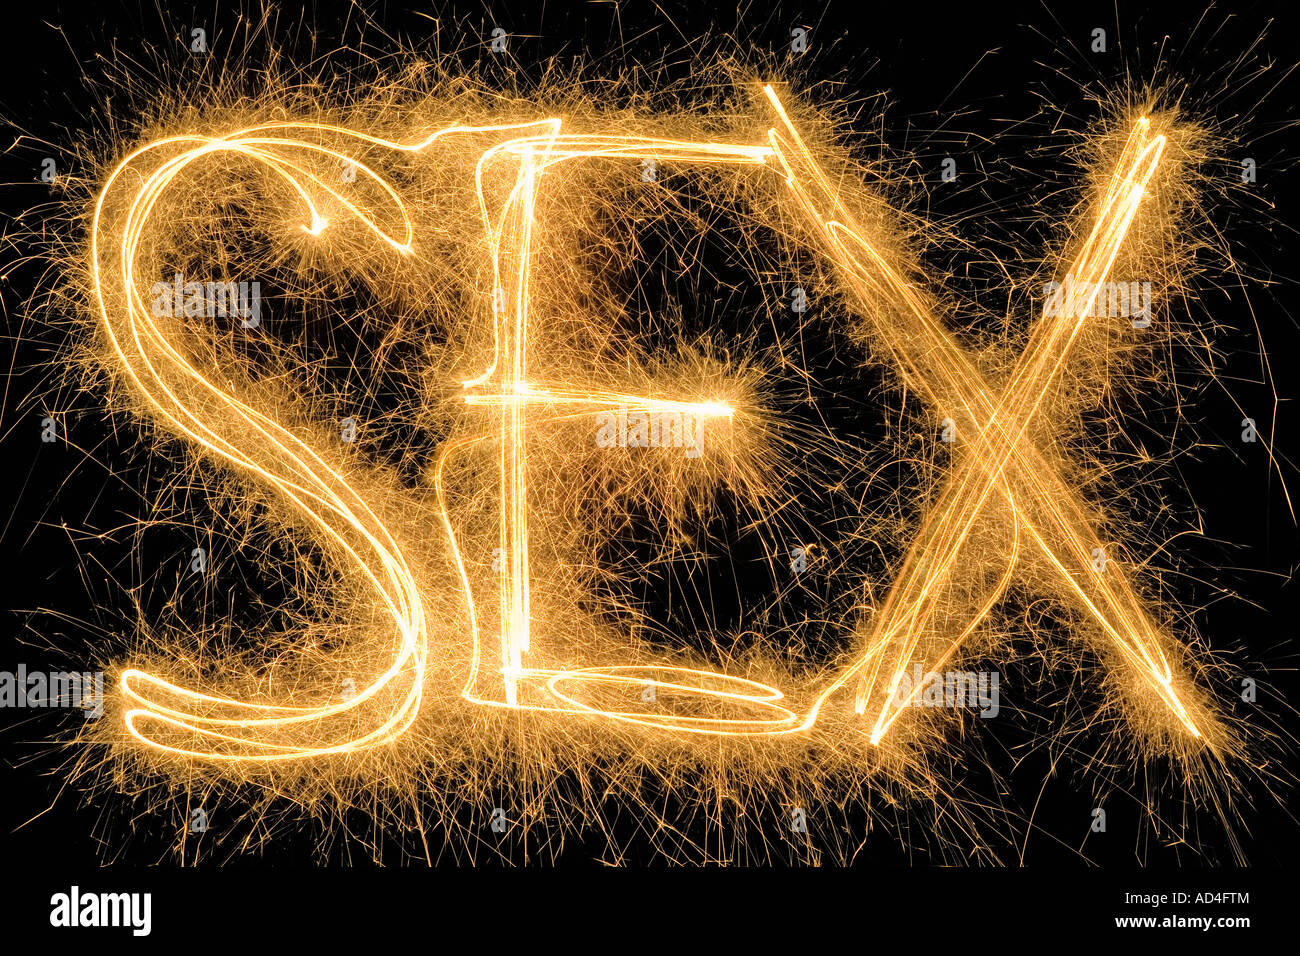 Sex' drawn with a sparkler Stock Photo